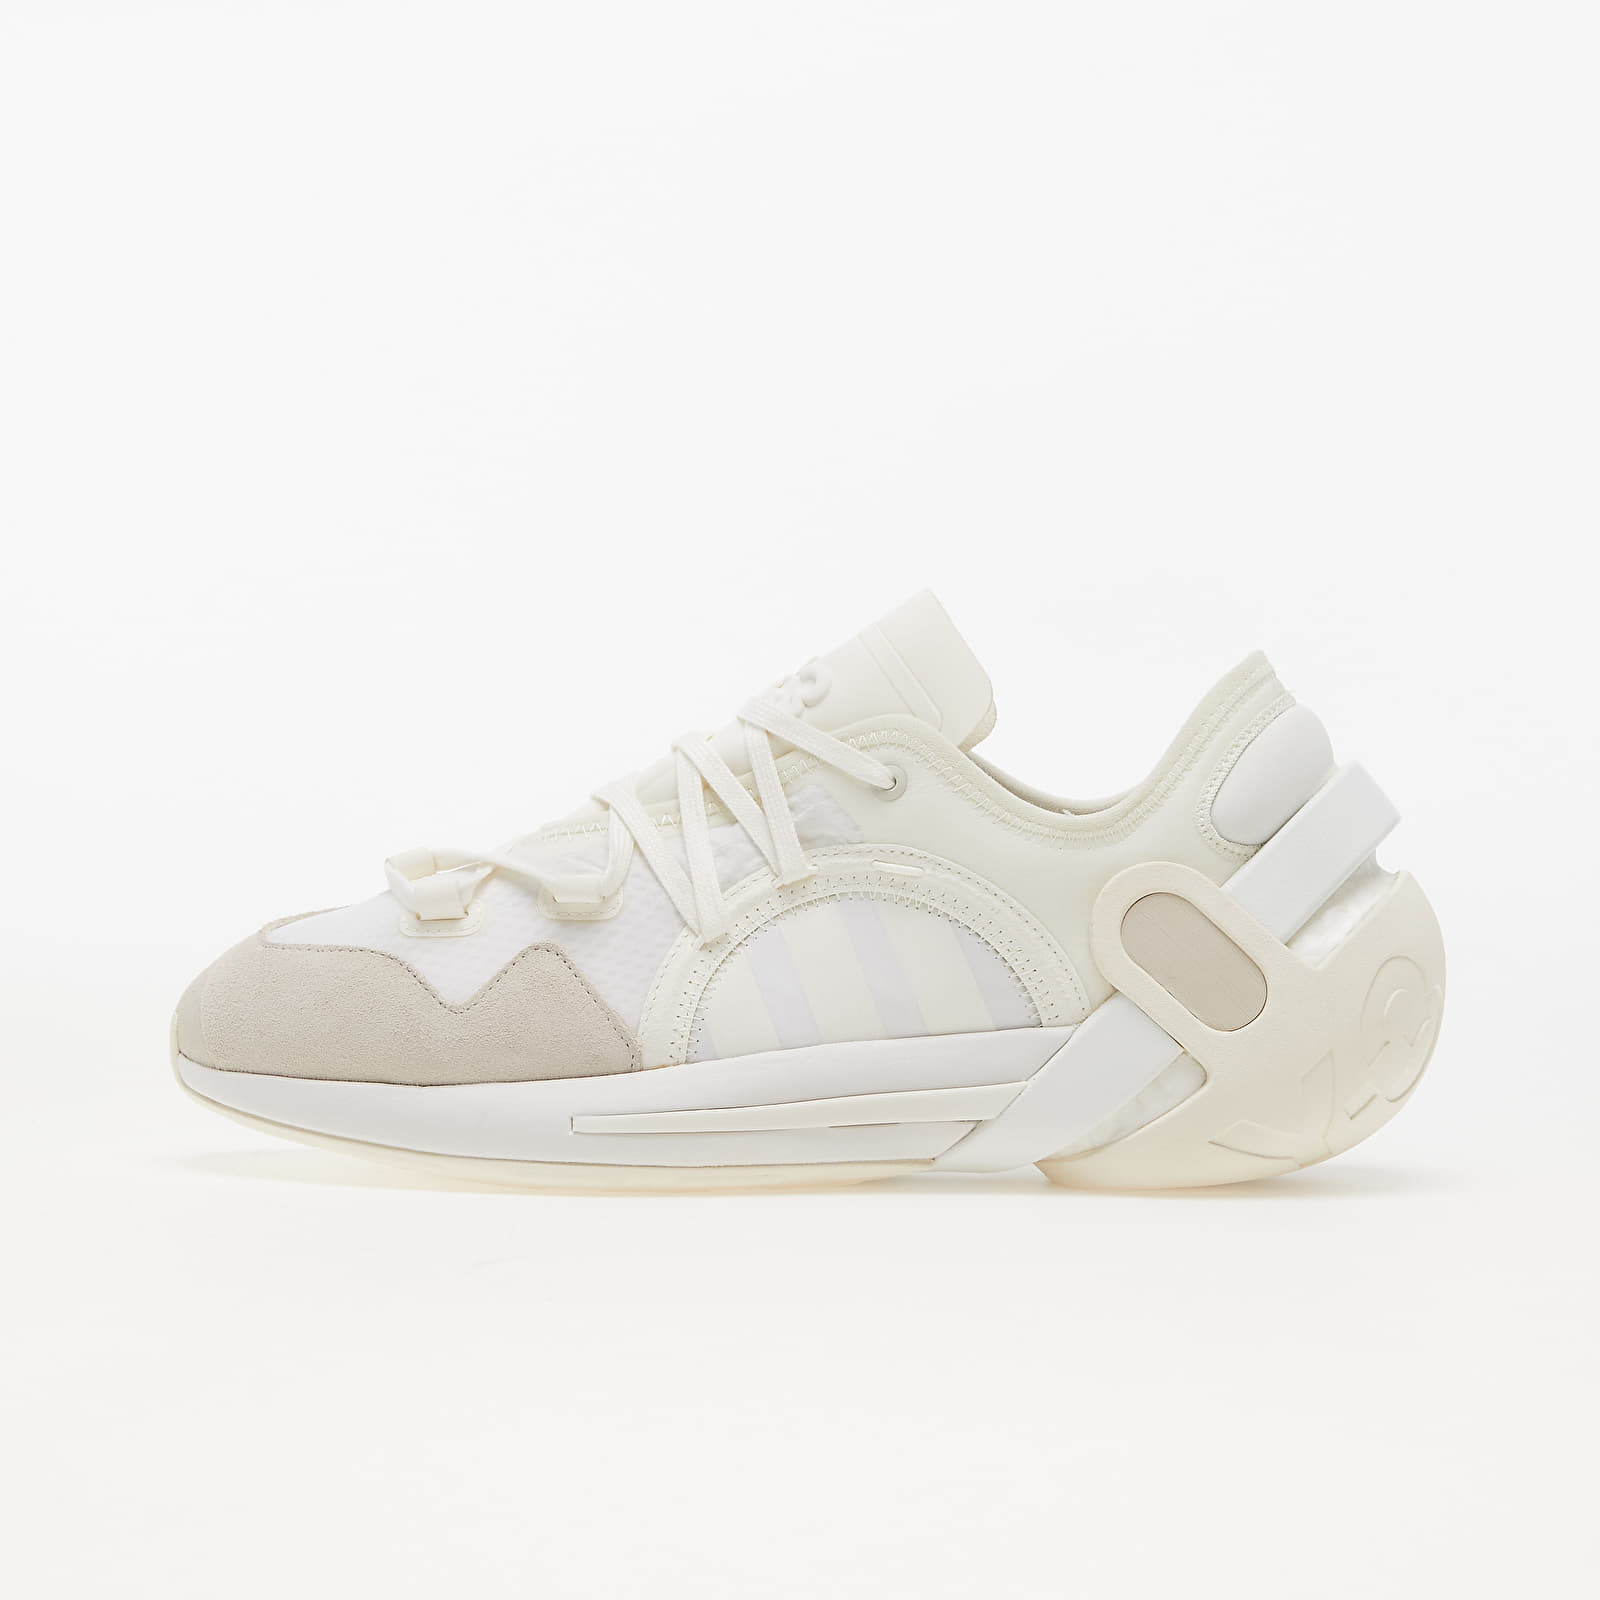 Pánske tenisky a topánky Y-3 Idoso BOOST Off White/ Clear Brown/ Core White